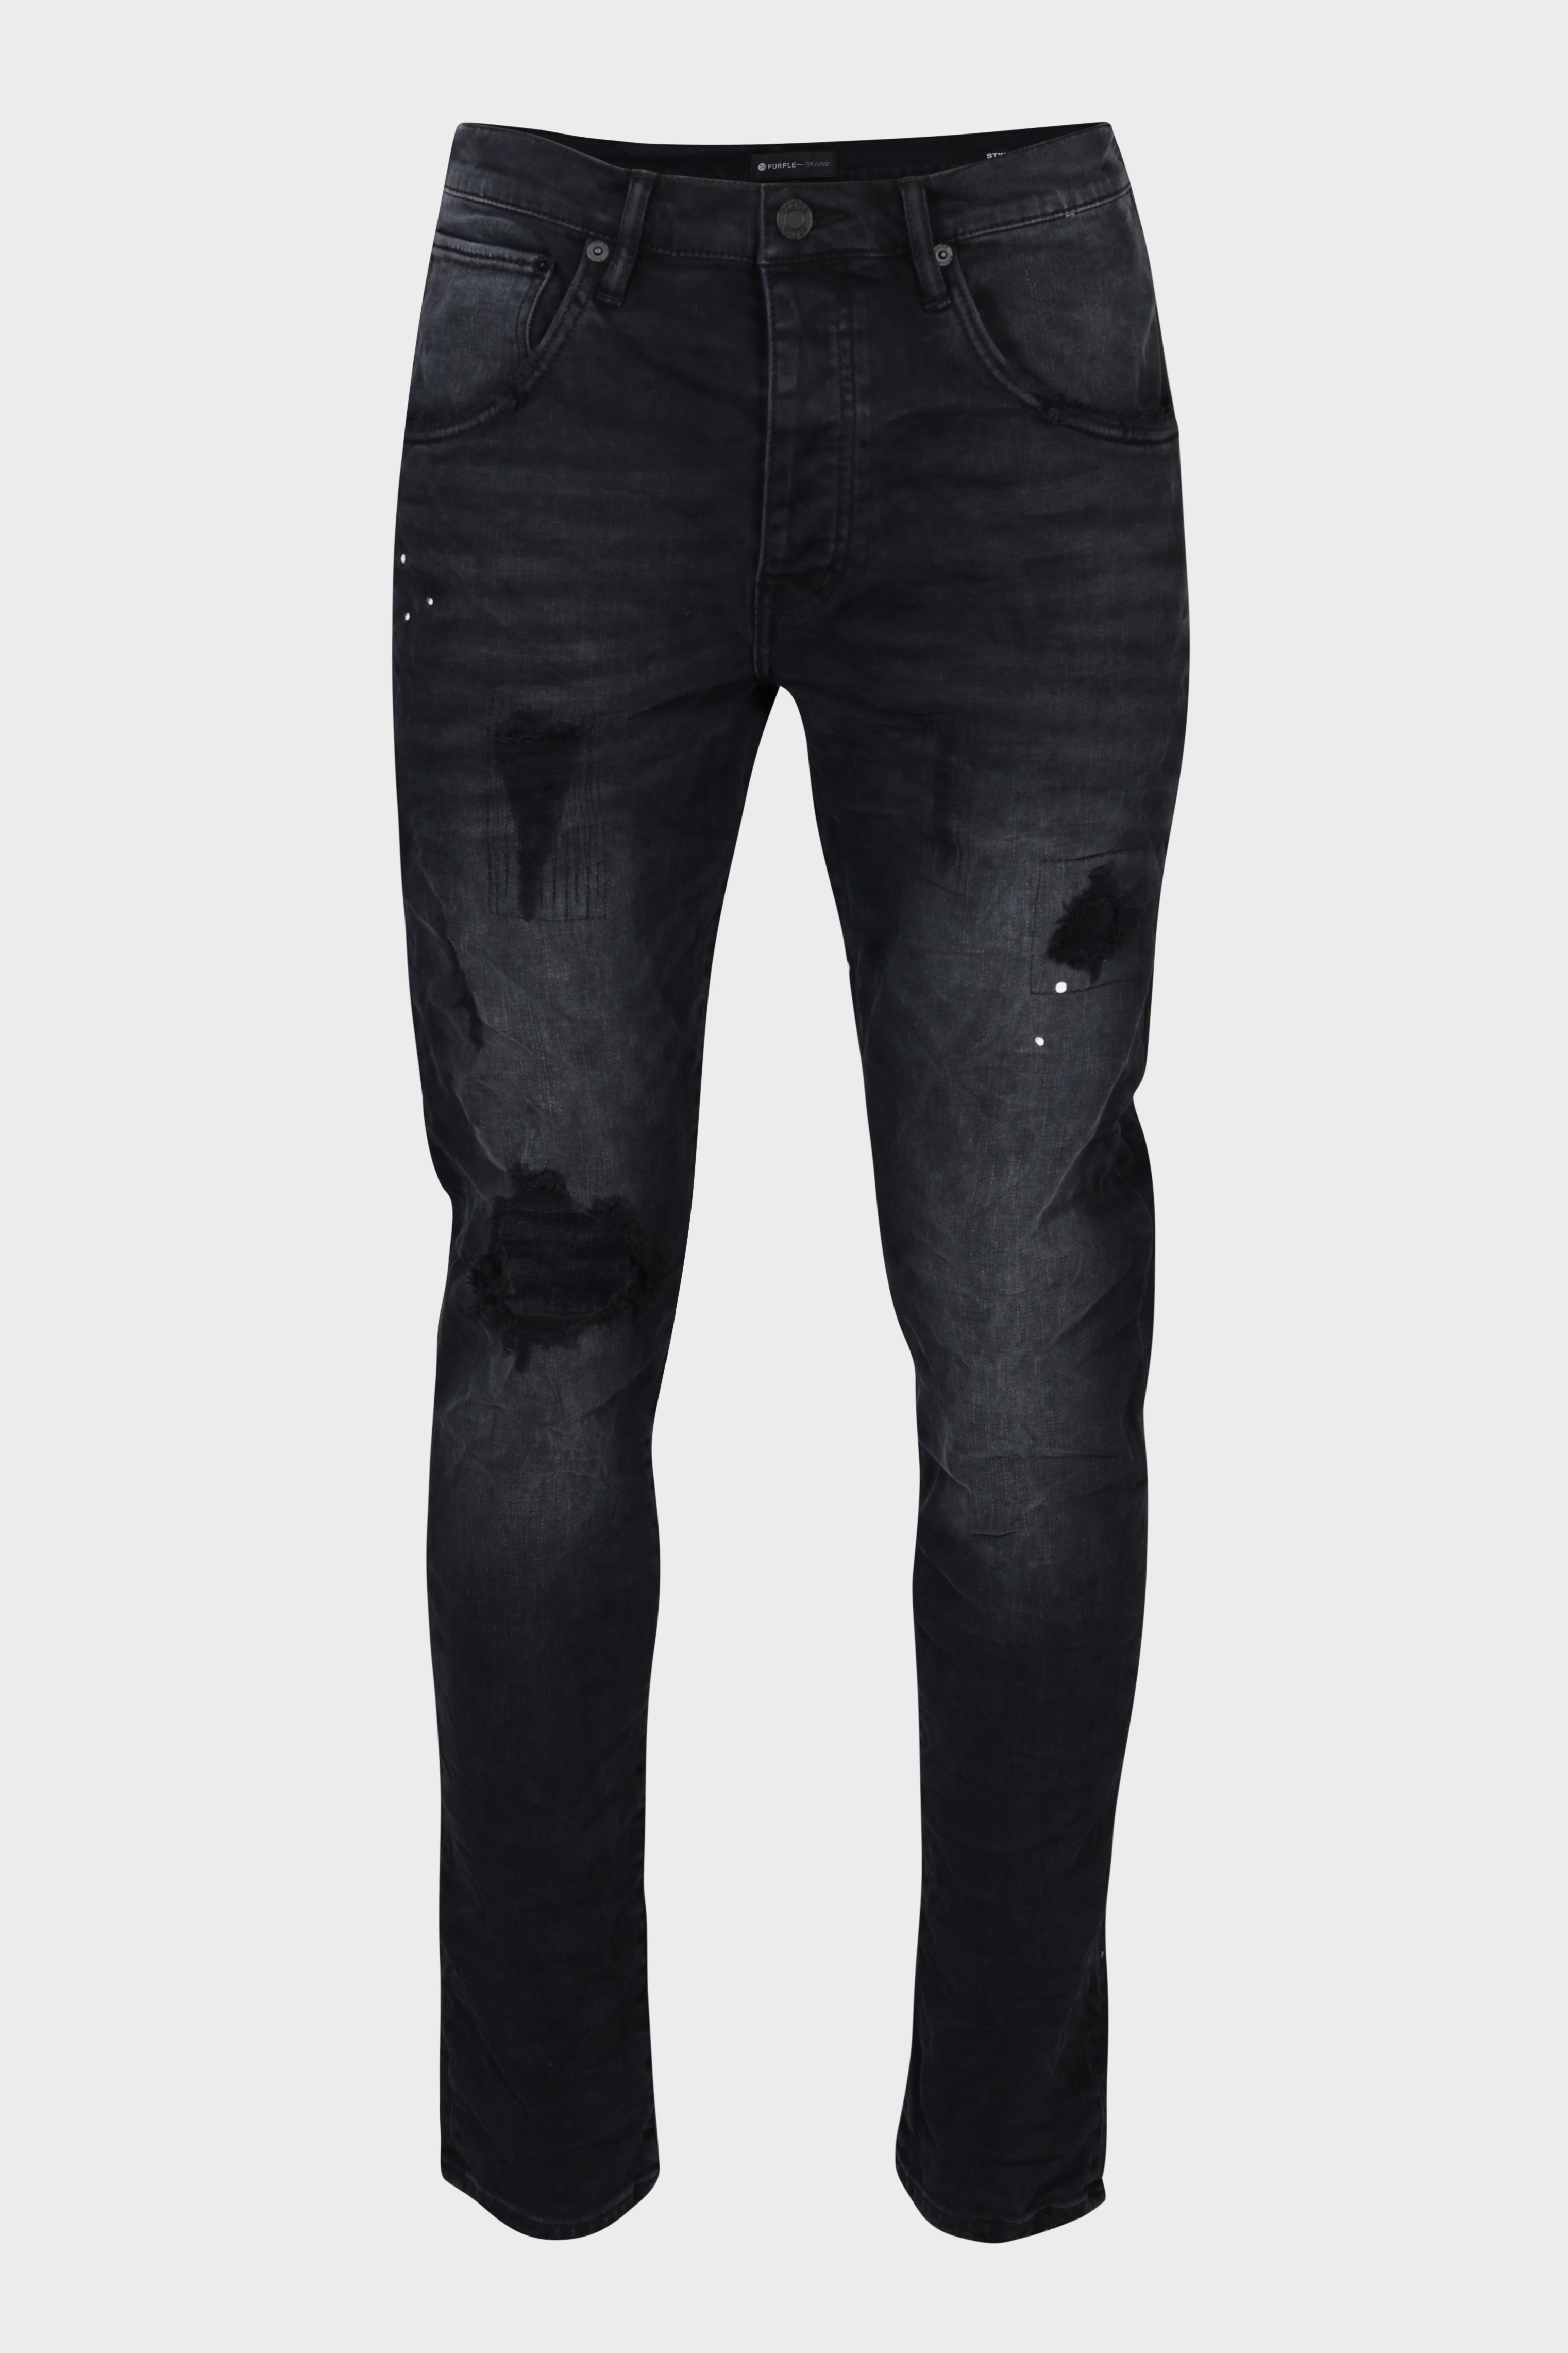 PURPLE-BRAND Jeans P002 in Washed Black